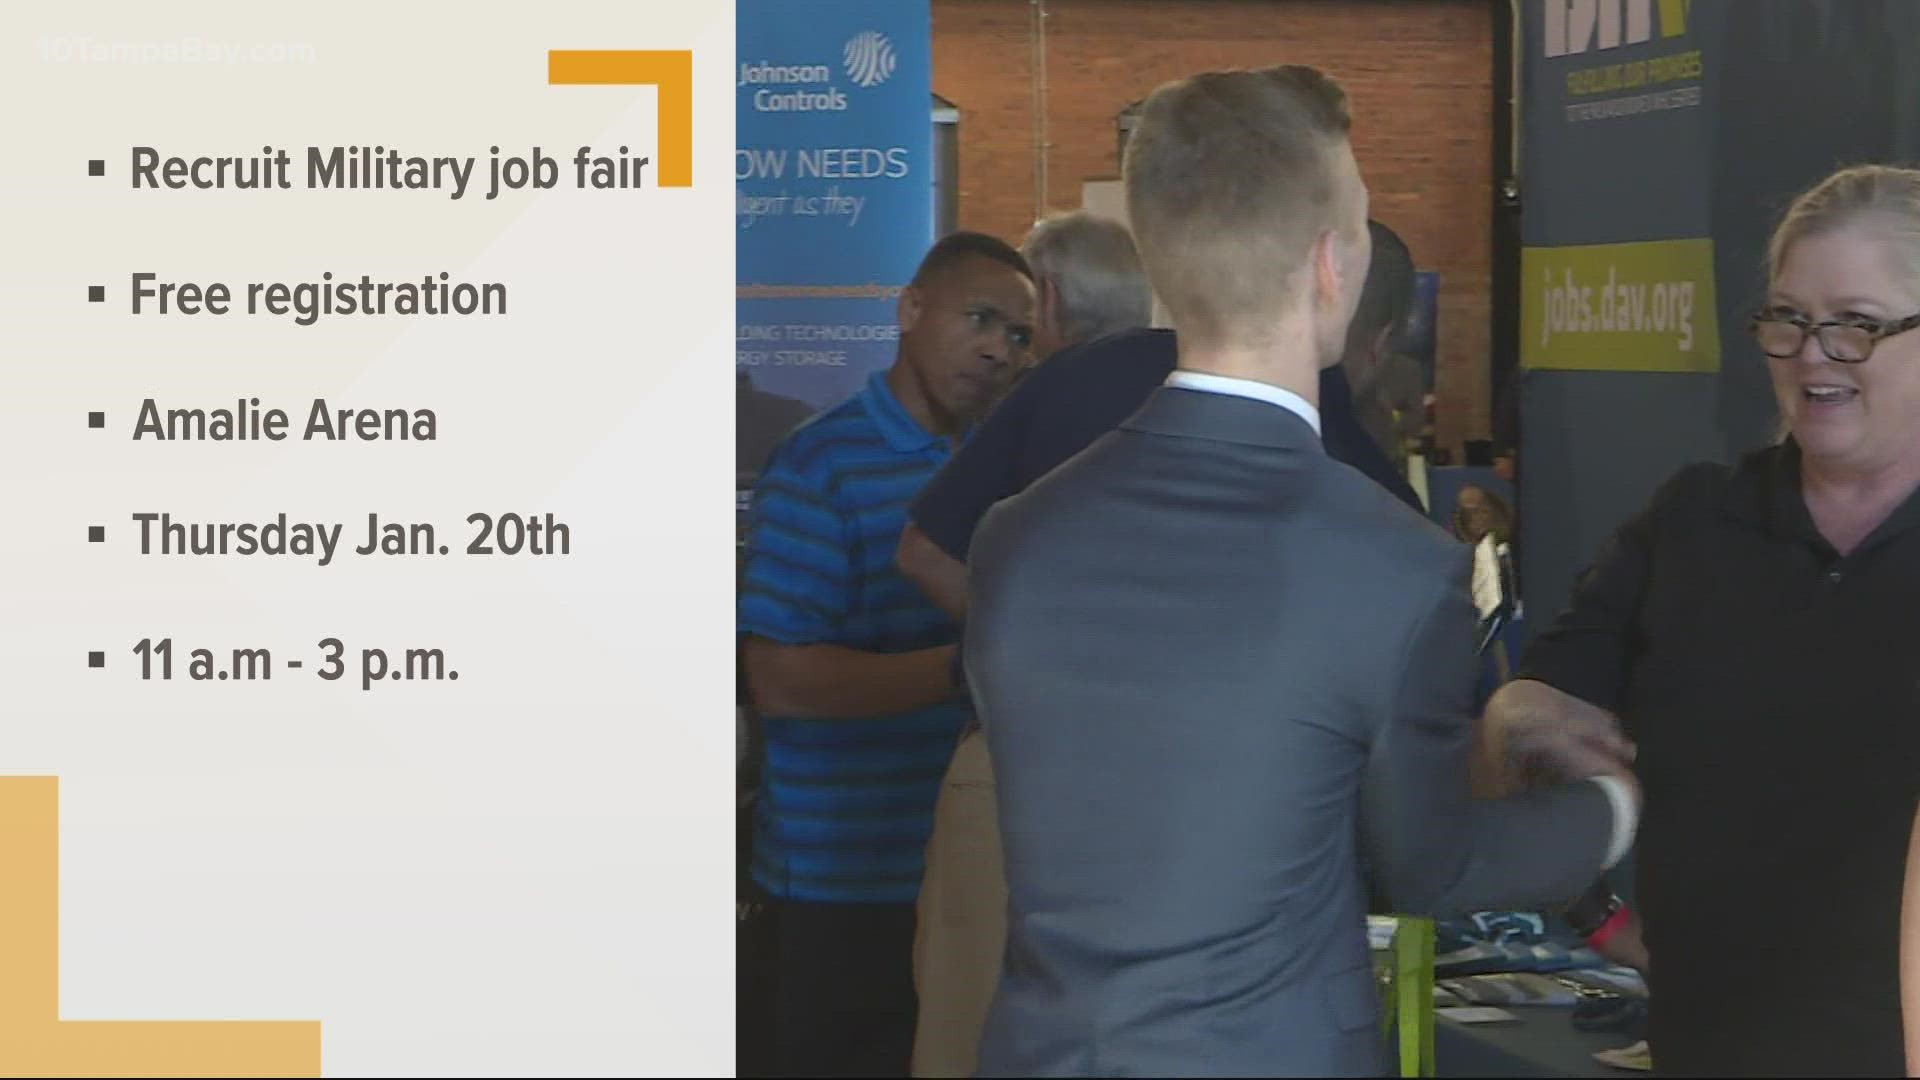 RecruitMilitary is hosting a free job fair on Thursday for Tampa's large military community.